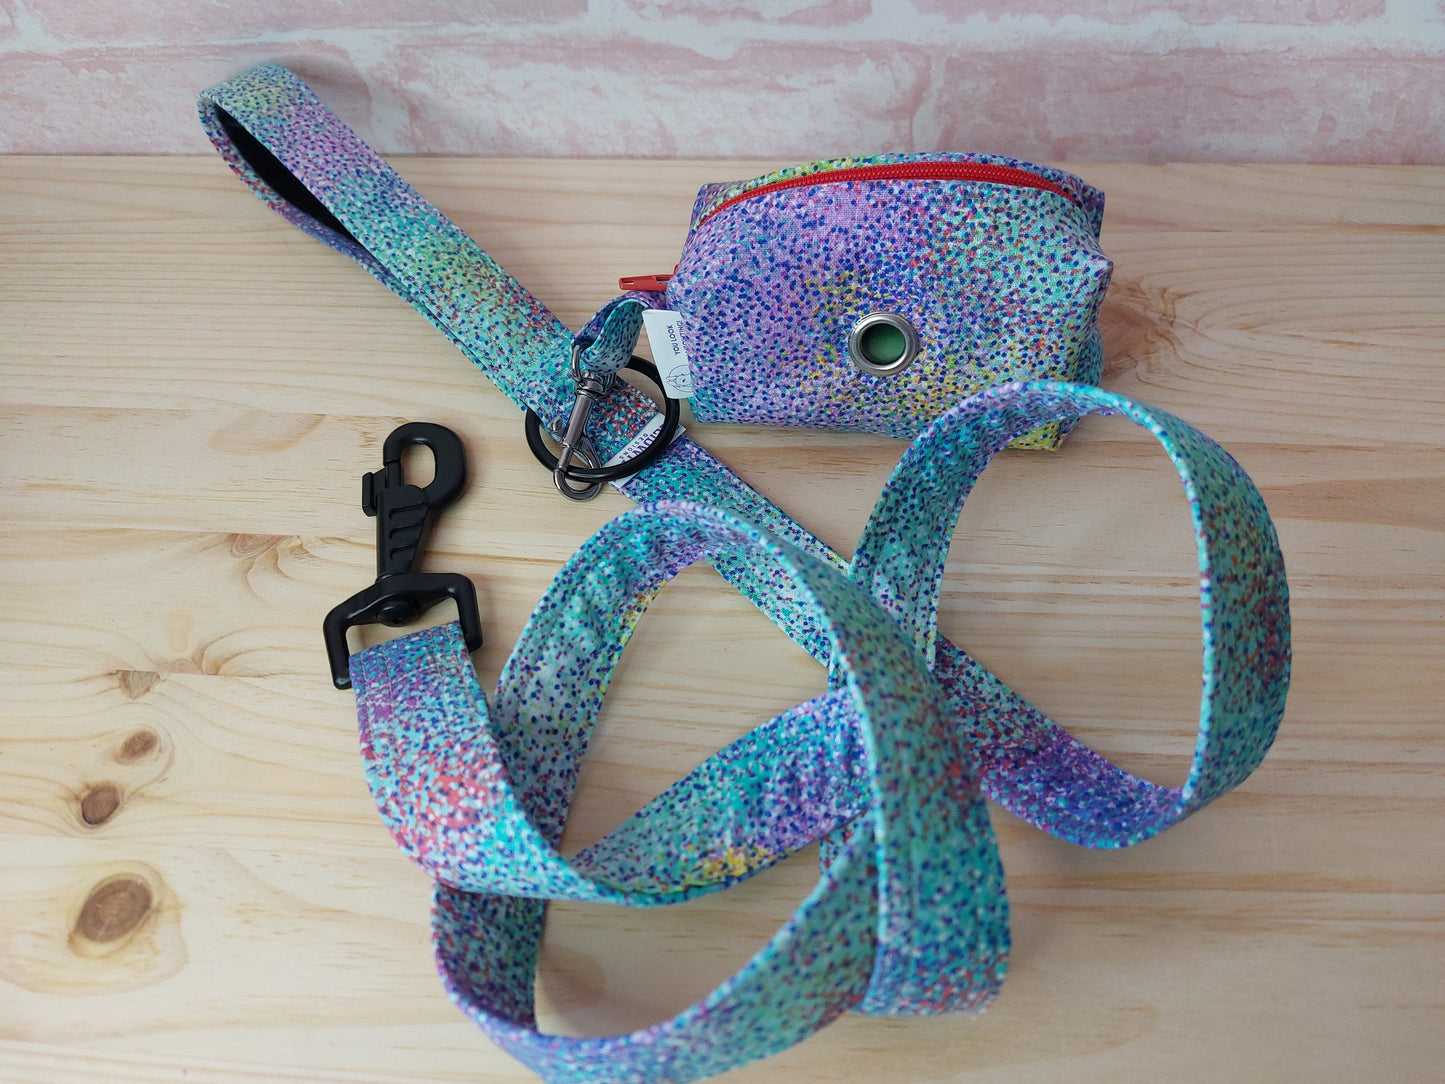 Speckled Rainbow | Pet Collection